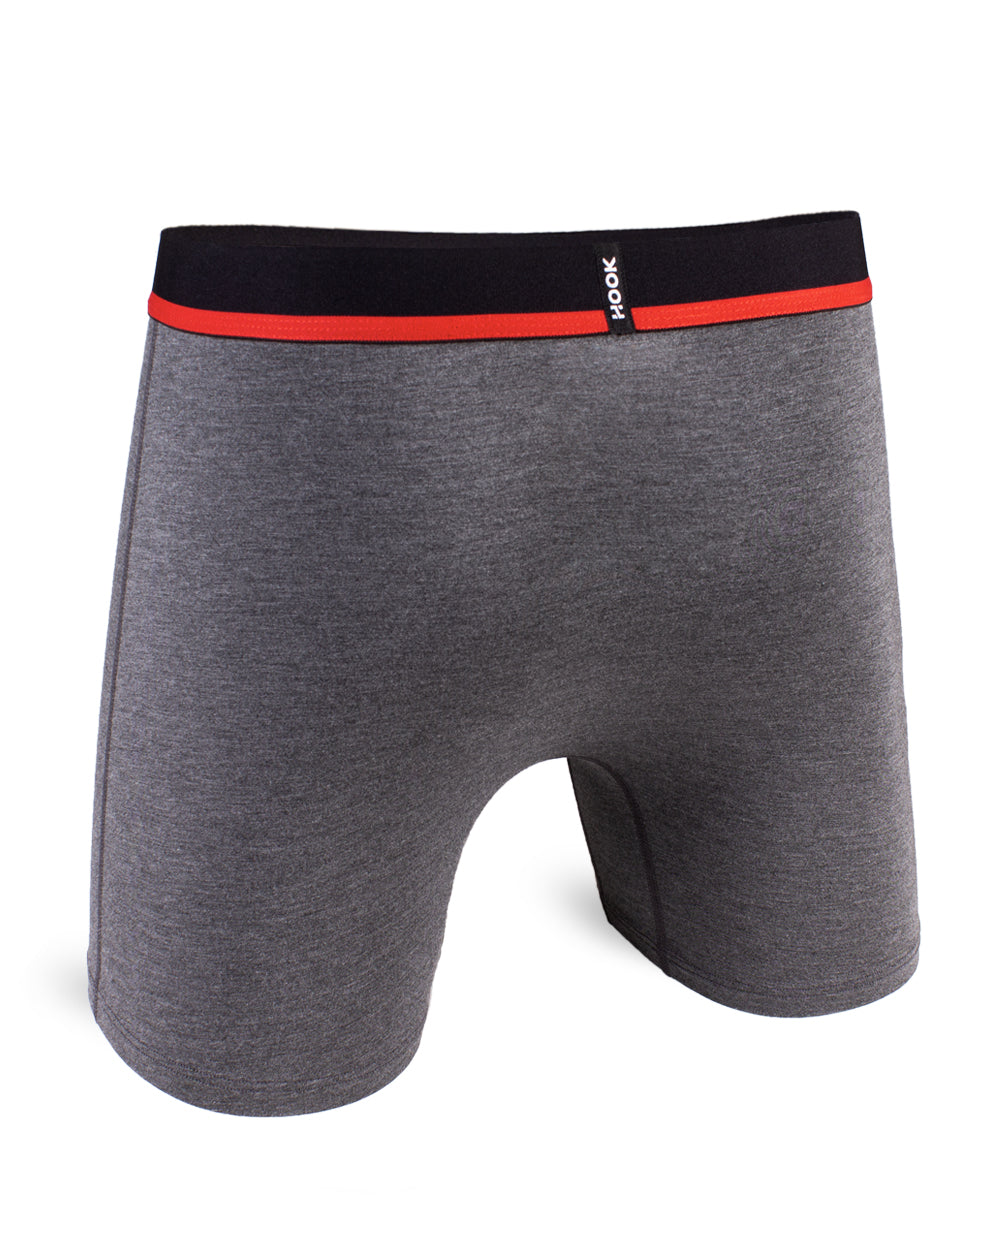 Boxer Feel : Solid Charcoal & Red